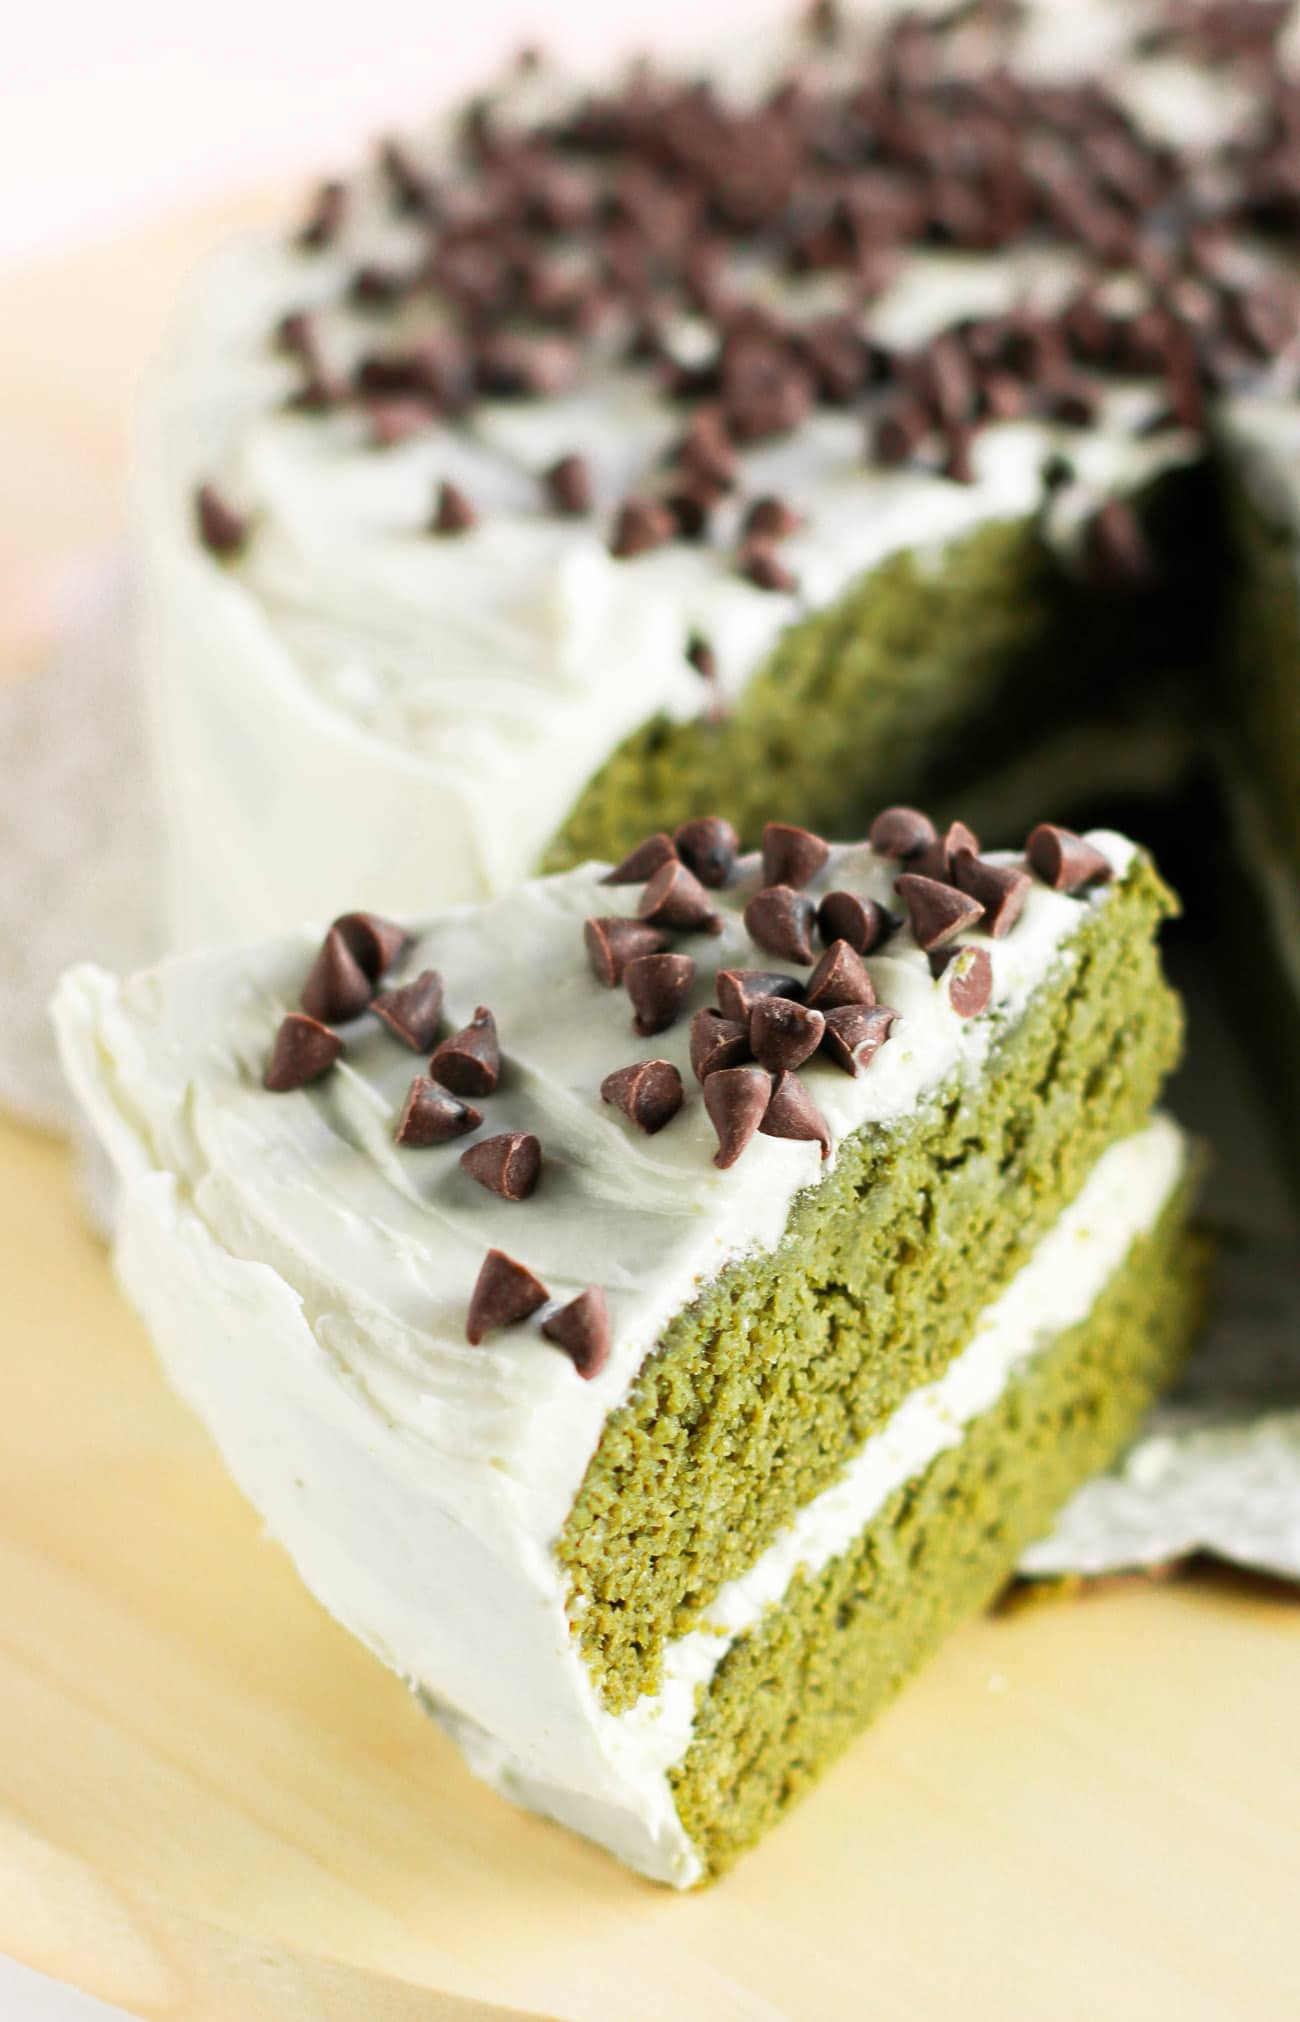 This Healthy Green Velvet Cake tastes exactly like Red Velvet Cake, only it's GREEN!  It's super moist, flavorful, and delicious, you'd never know it's sugar free, low fat, high fiber, and gluten free too.  It also happens to be the perfect green Saint Patrick's Day dessert!